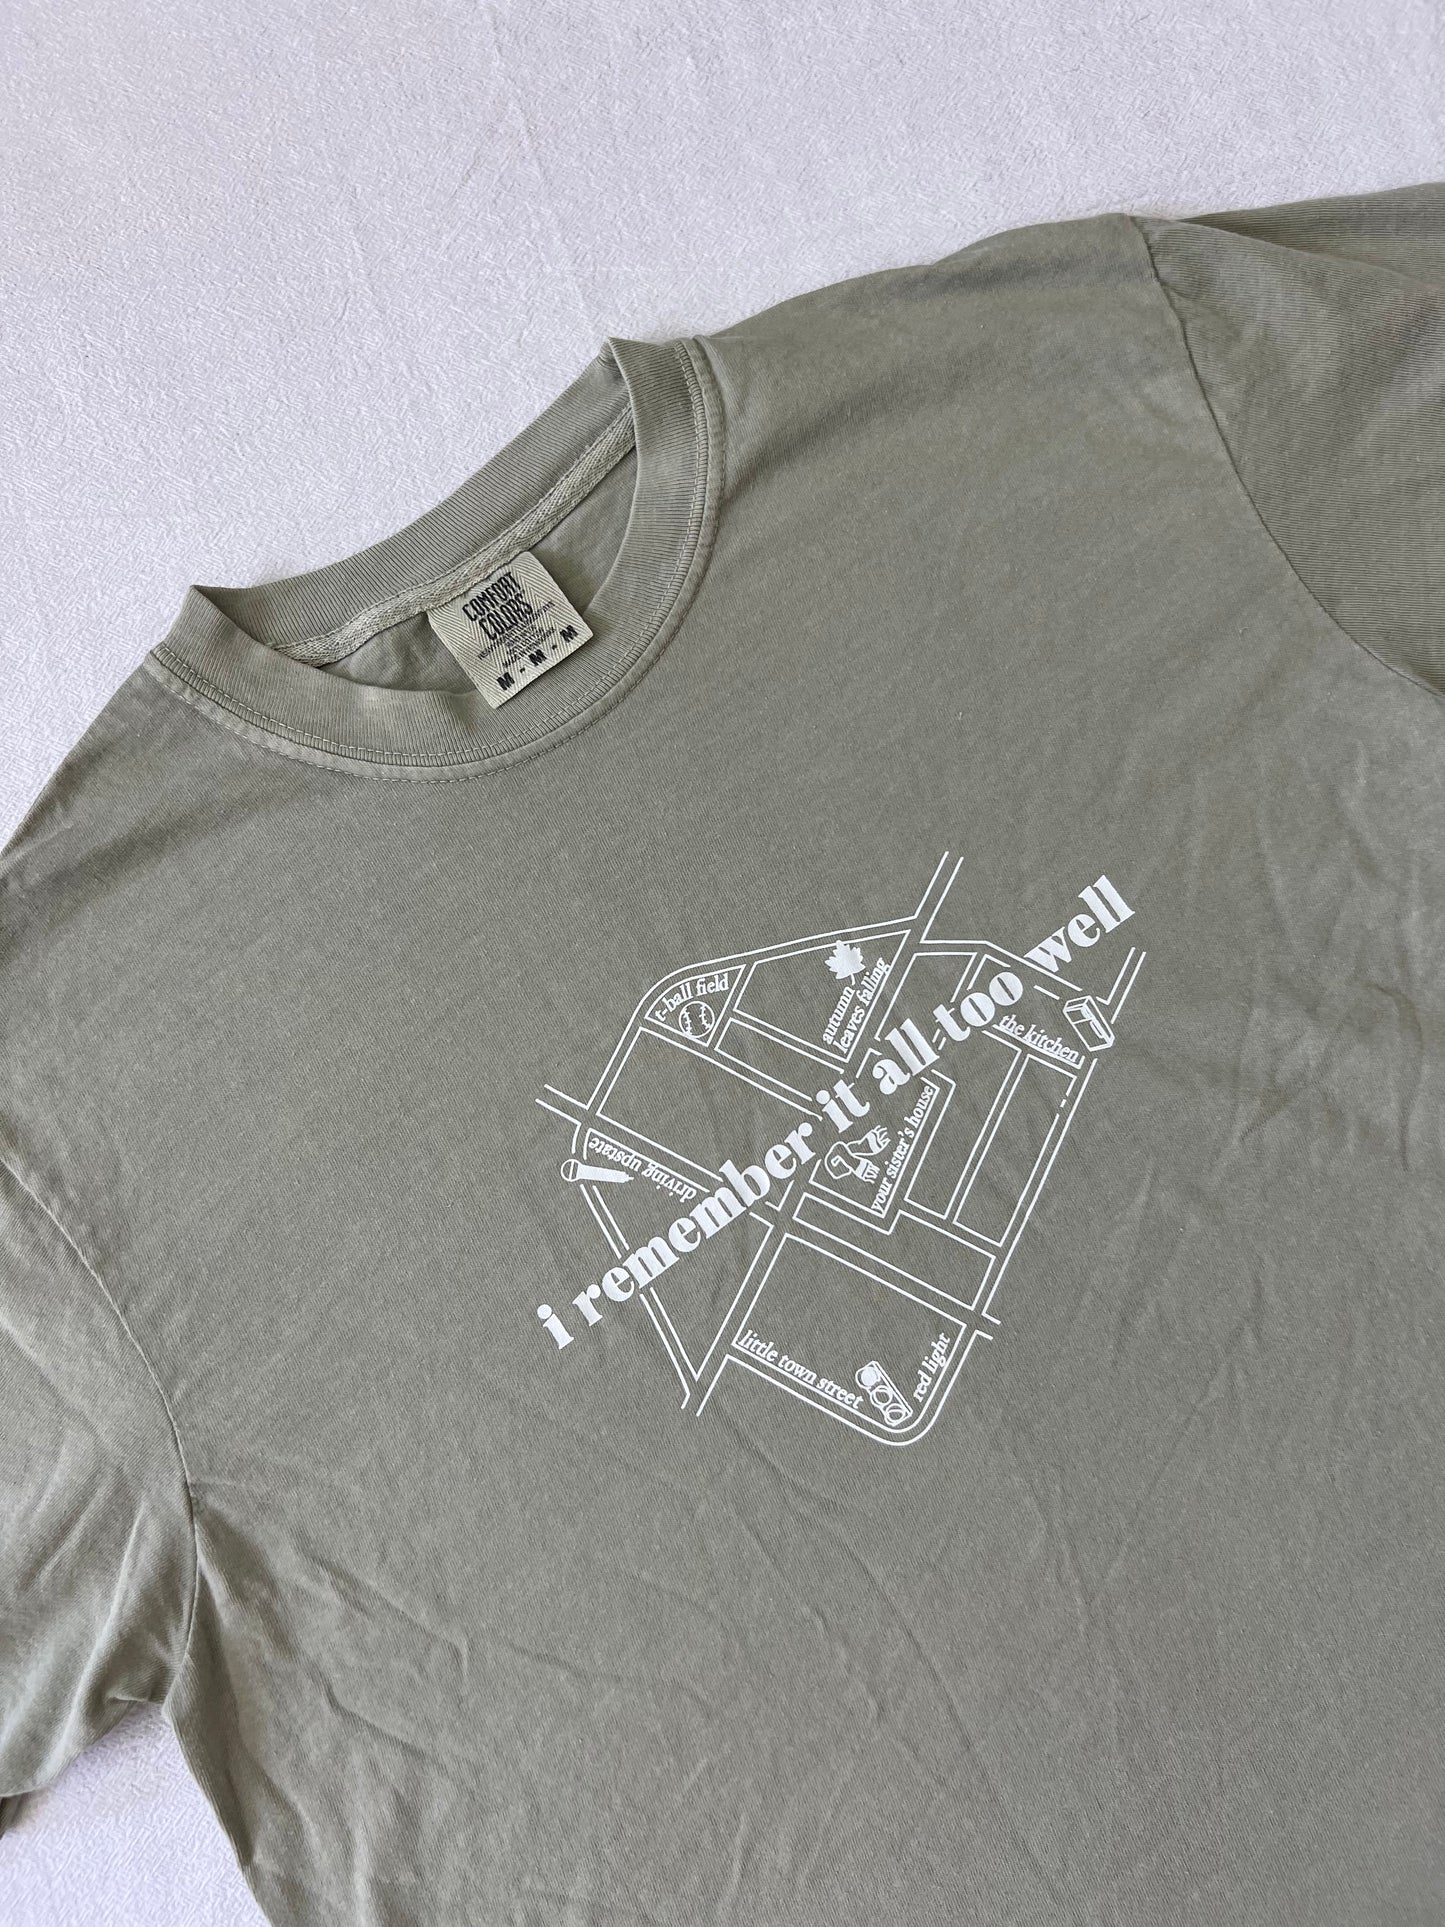 ATW Map It Out Tee: Size M, Khaki (SAMPLE SALE)